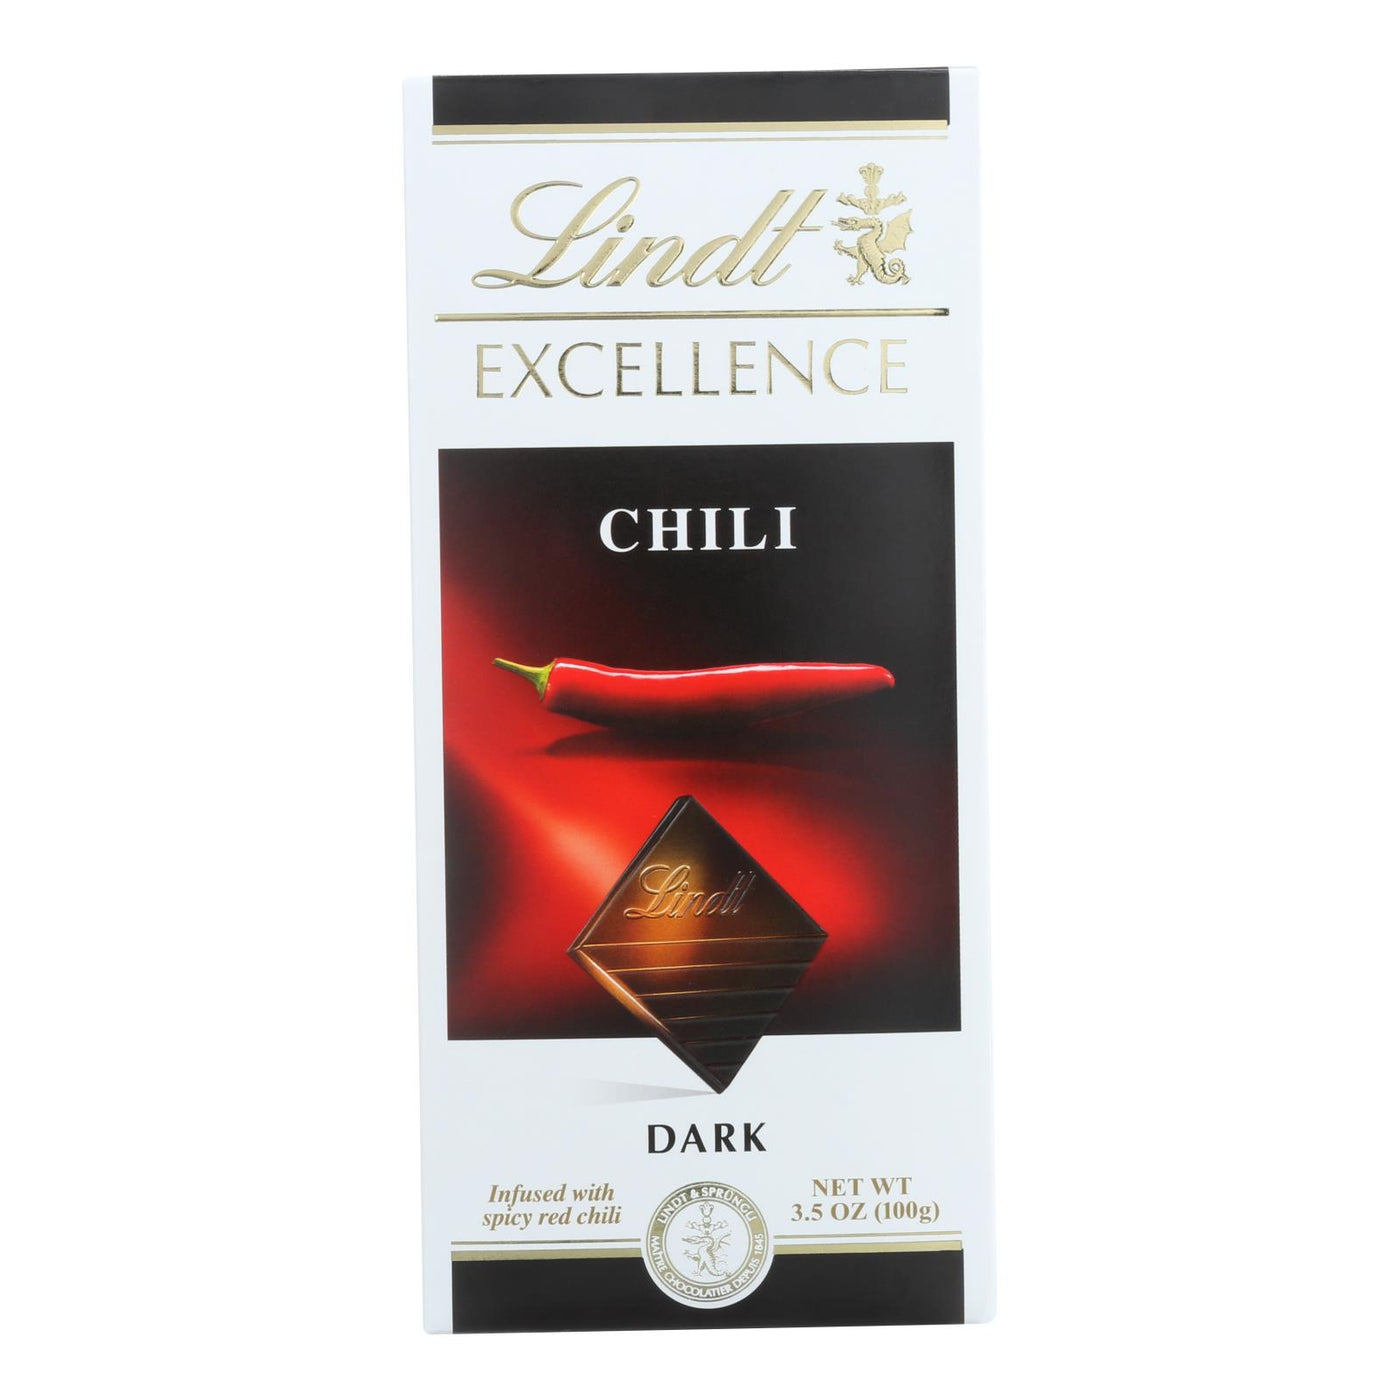 Lindt Chocolate Bar - Dark Chocolate - 47 Percent Cocoa - Excellence - Chili - 3.5 Oz Bars - Case Of 12 | OnlyNaturals.us